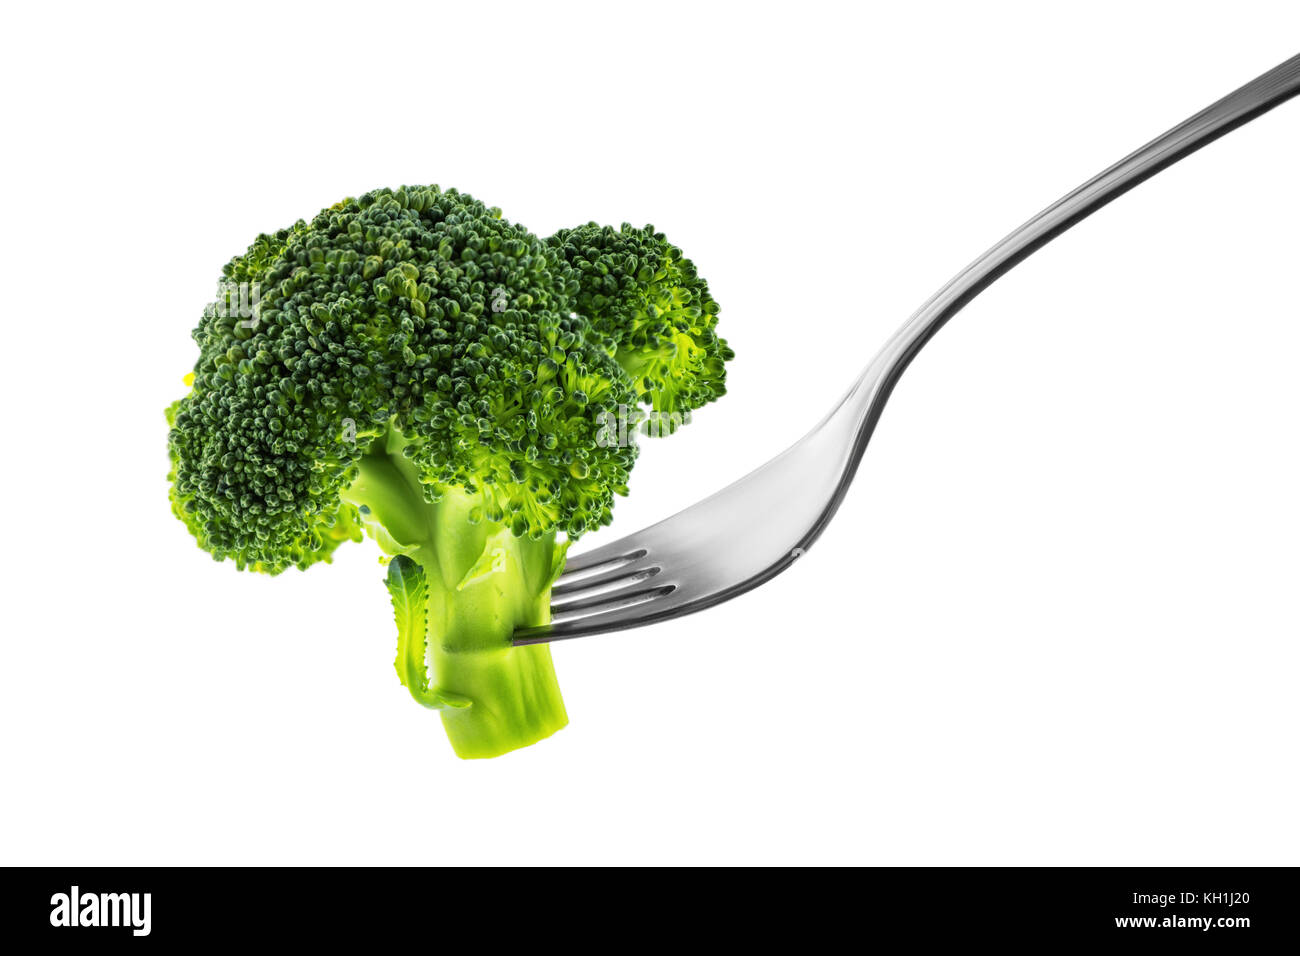 Fork with Broccoli isolated on White Background Stock Photo